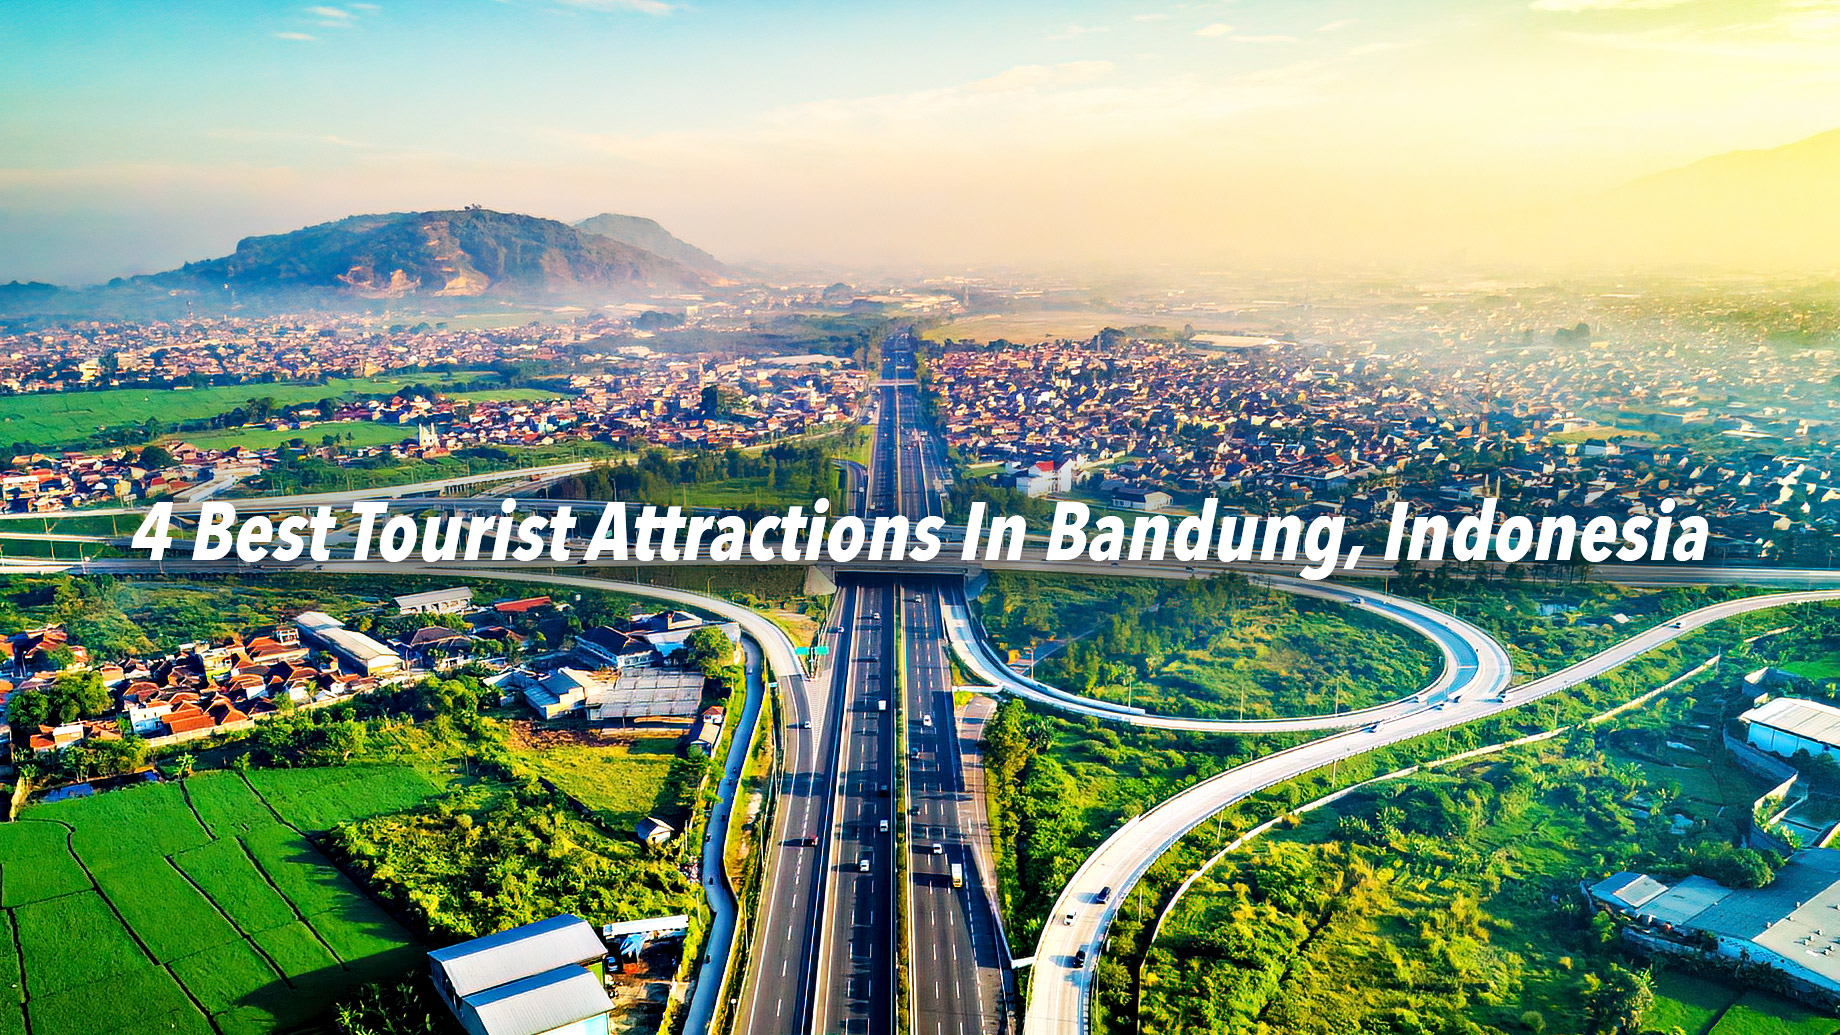 4 Best Tourist Attractions In Bandung